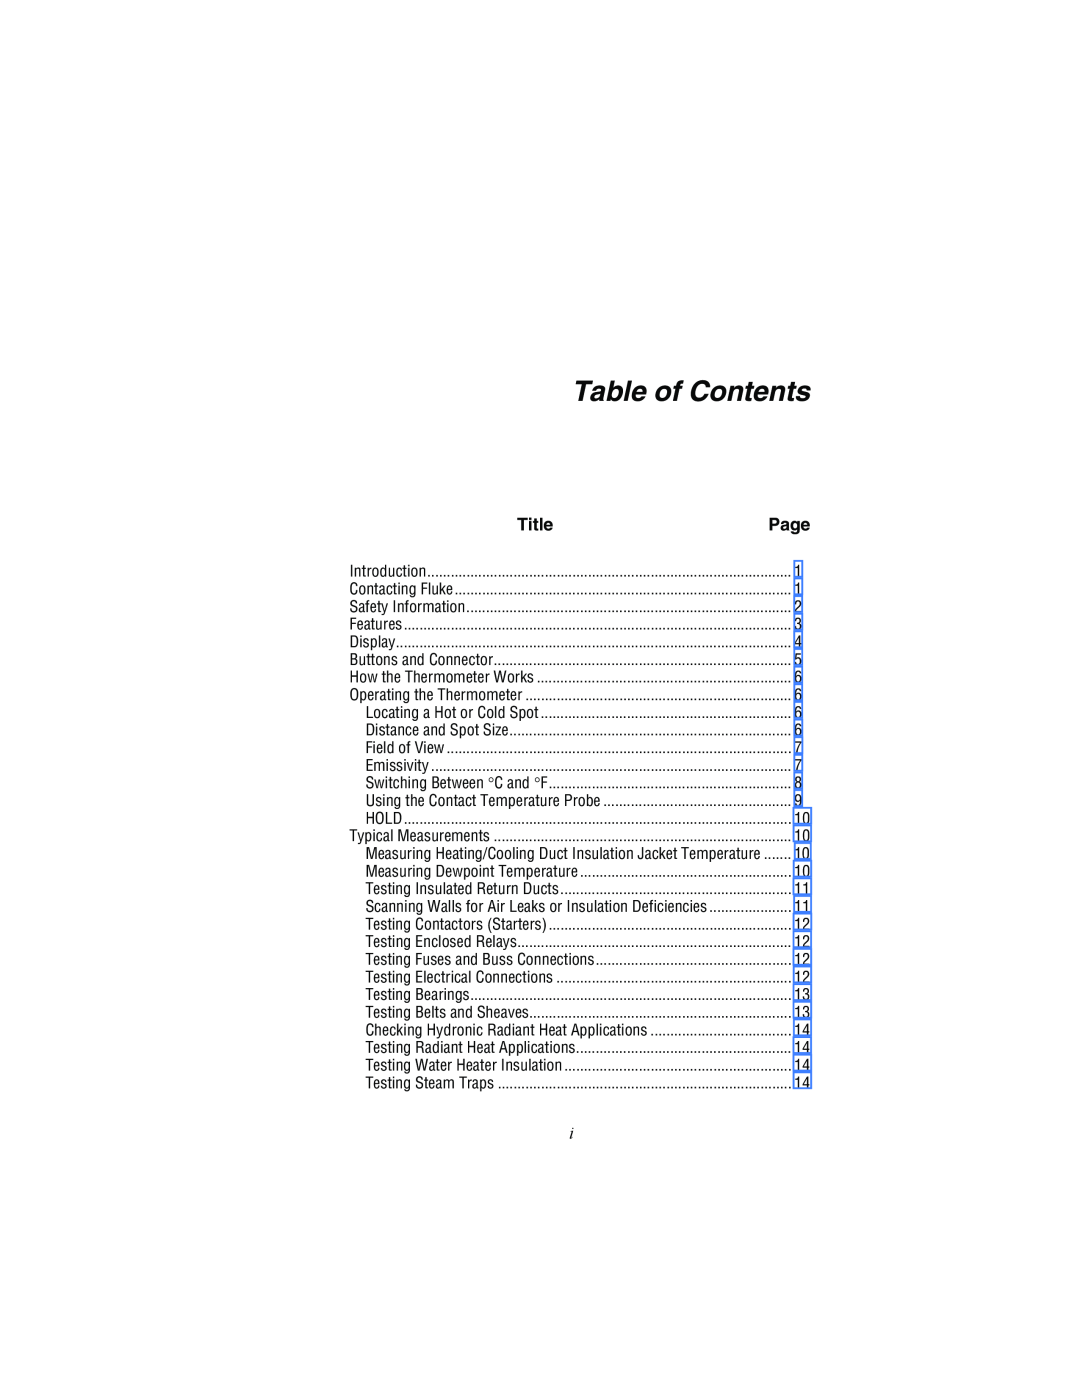 Fluke 561 user manual Table of Contents, Page, Title, Measuring Heating/Cooling Duct Insulation Jacket Temperature 